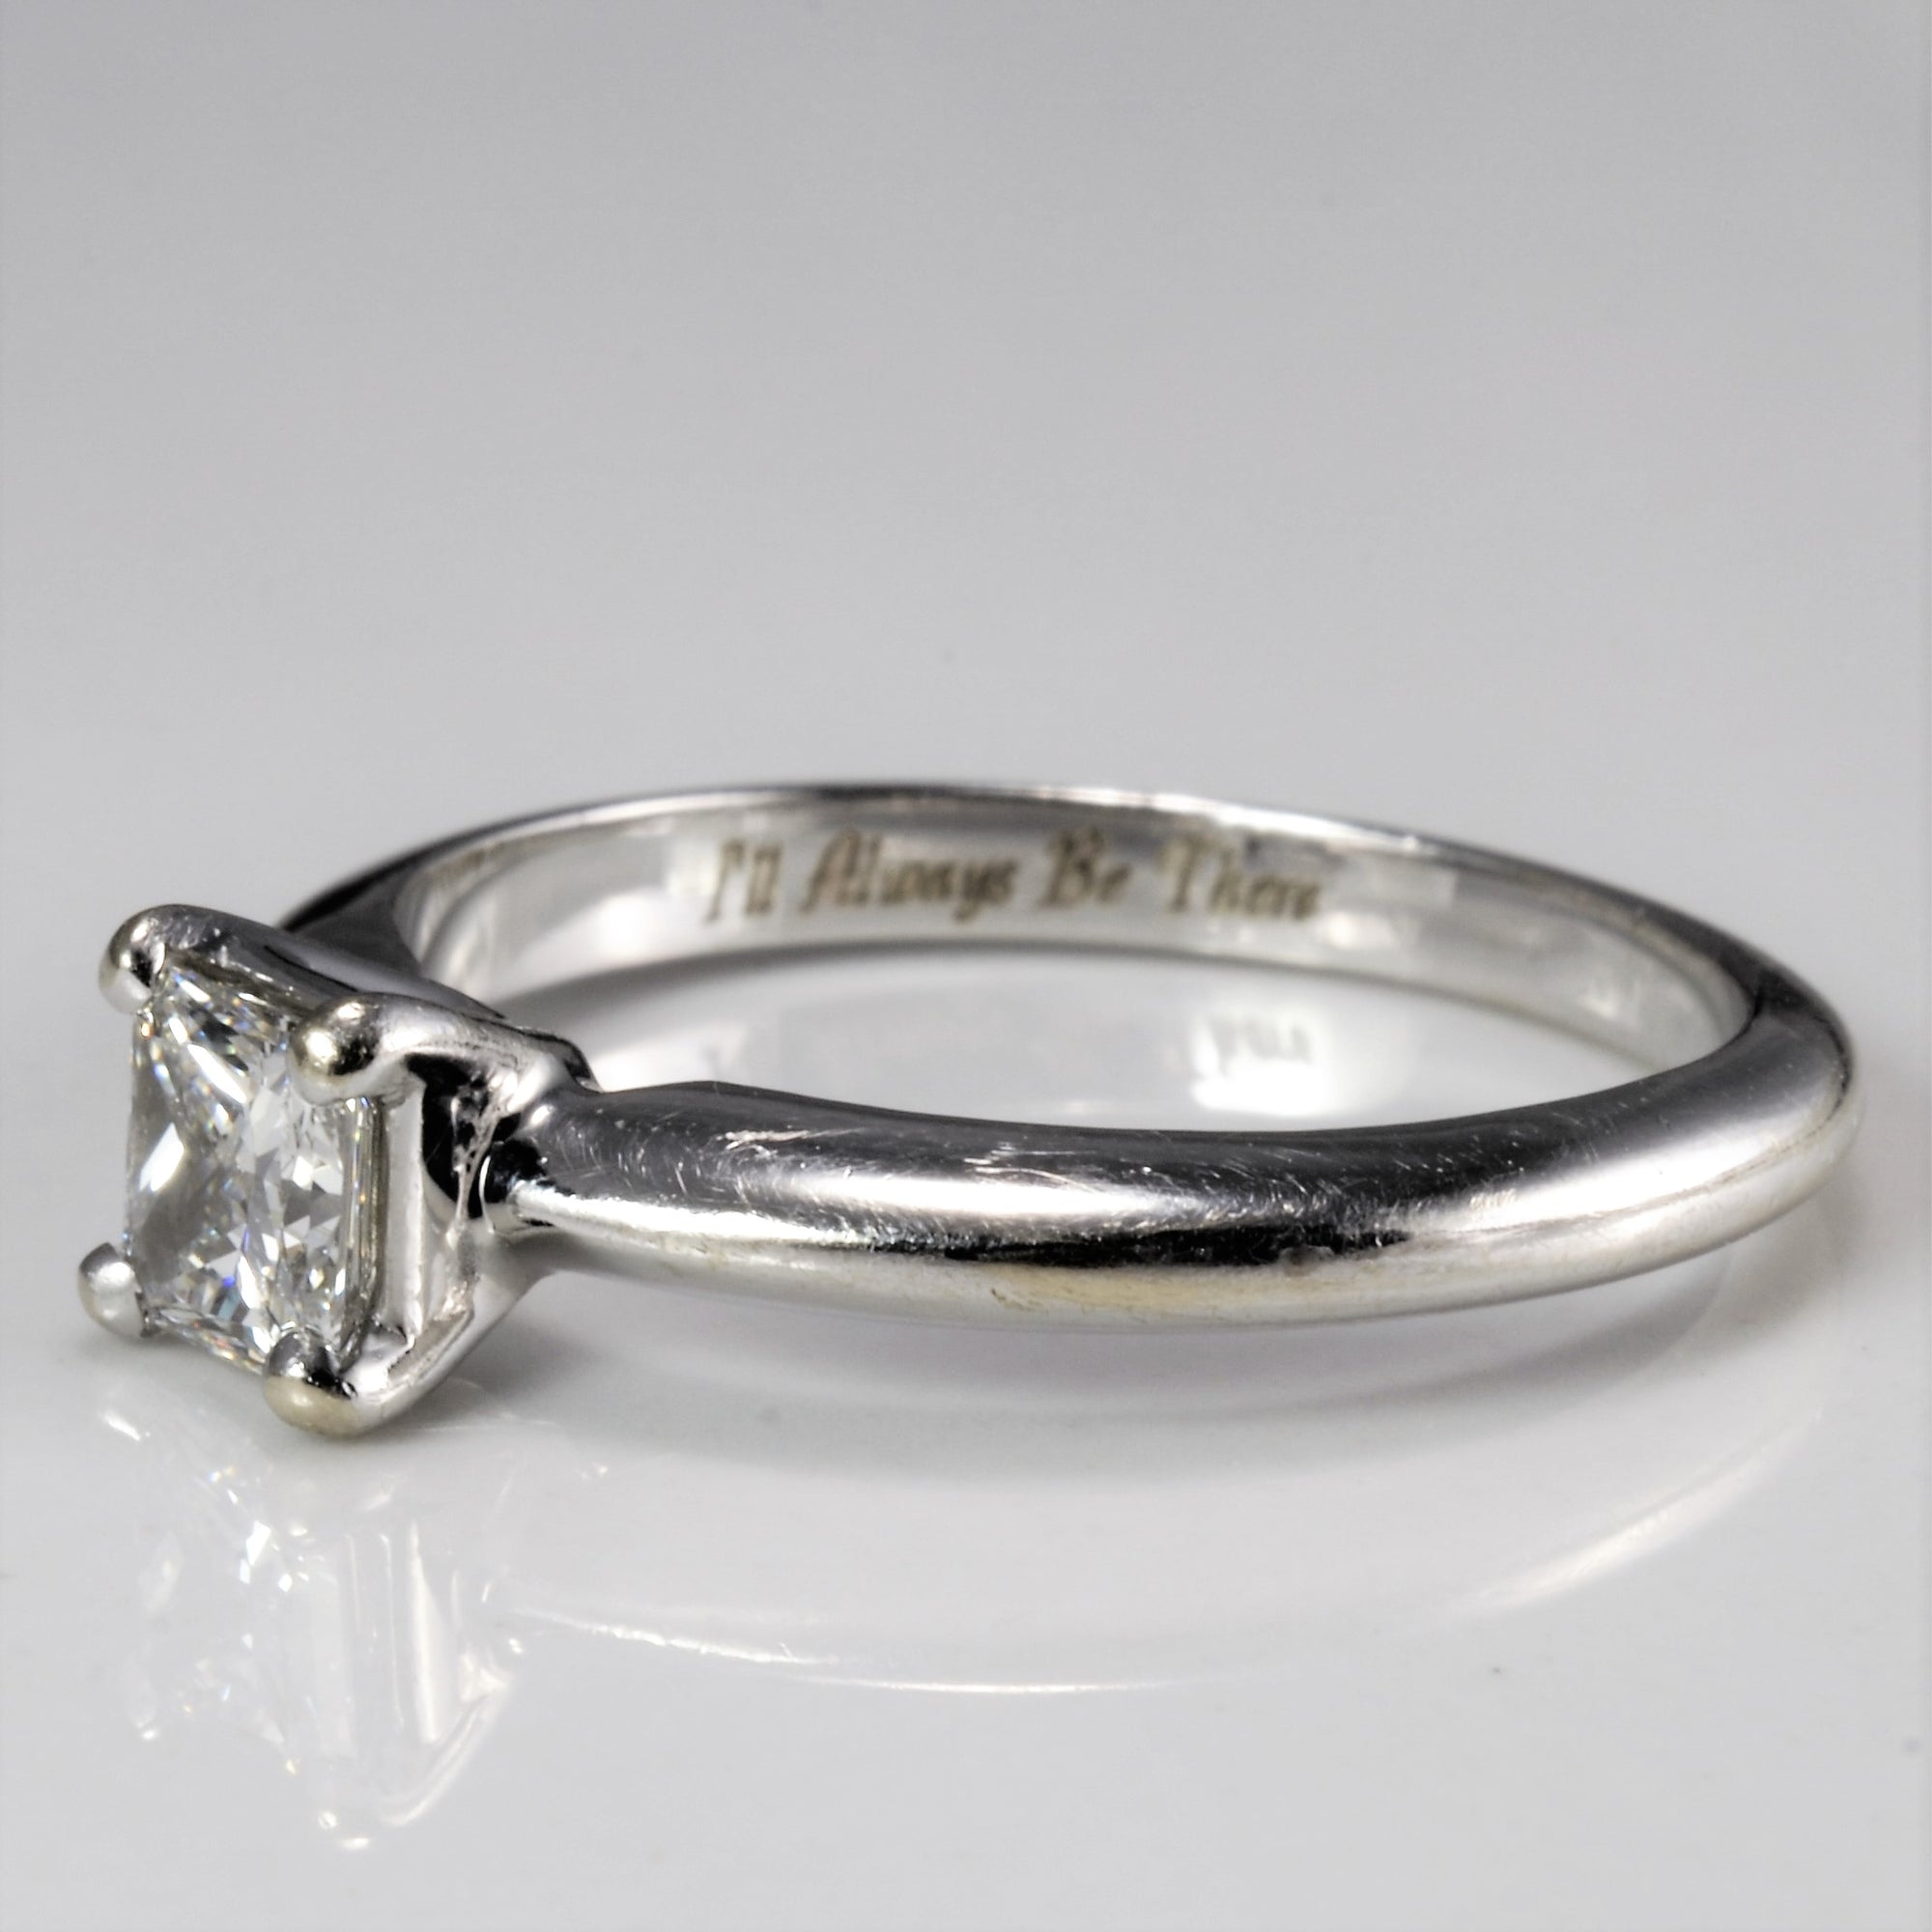 I'll Always Be There' Engraved Princess Cut GIA Engagement Ring | 0.41 ct, SZ 5.25 | VVS1, F |